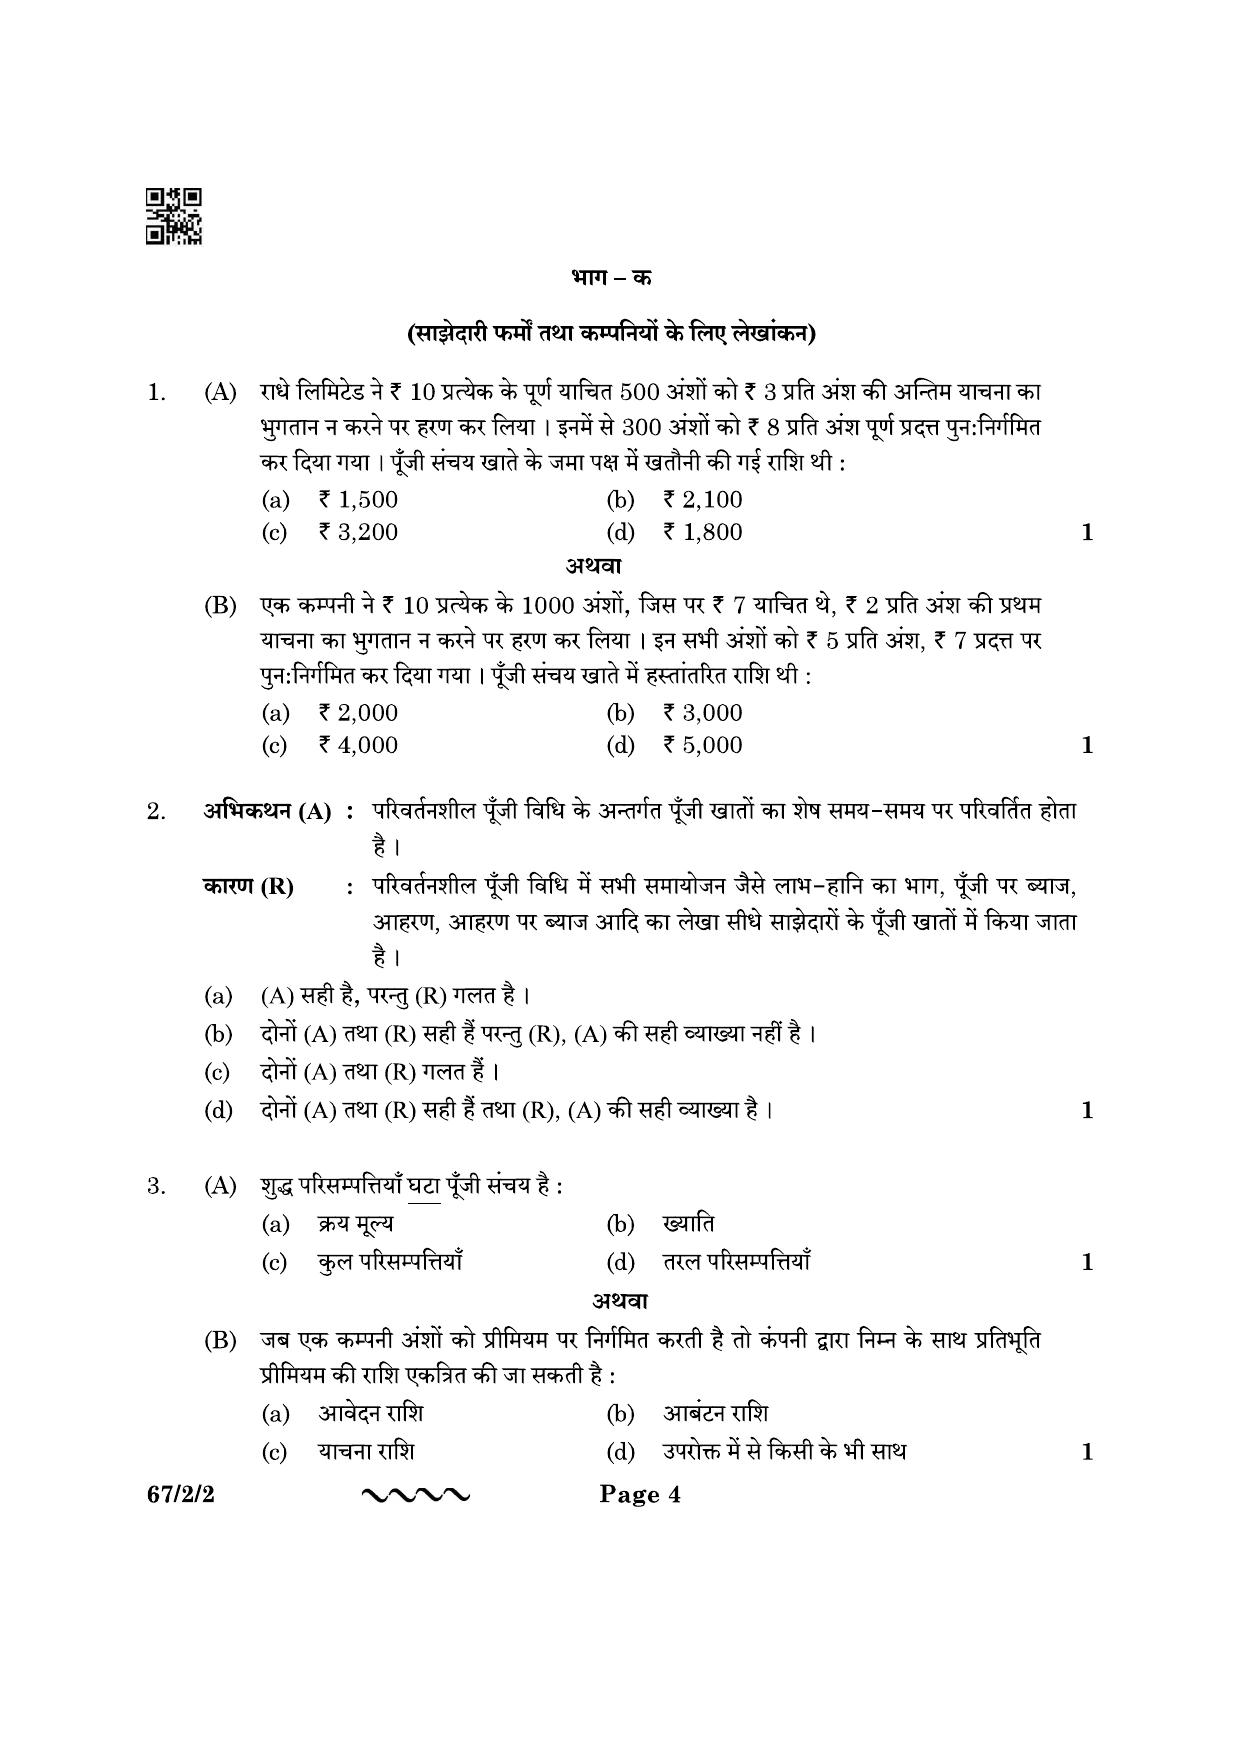 CBSE Class 12 67-2-2 Accountancy 2023 Question Paper - Page 4